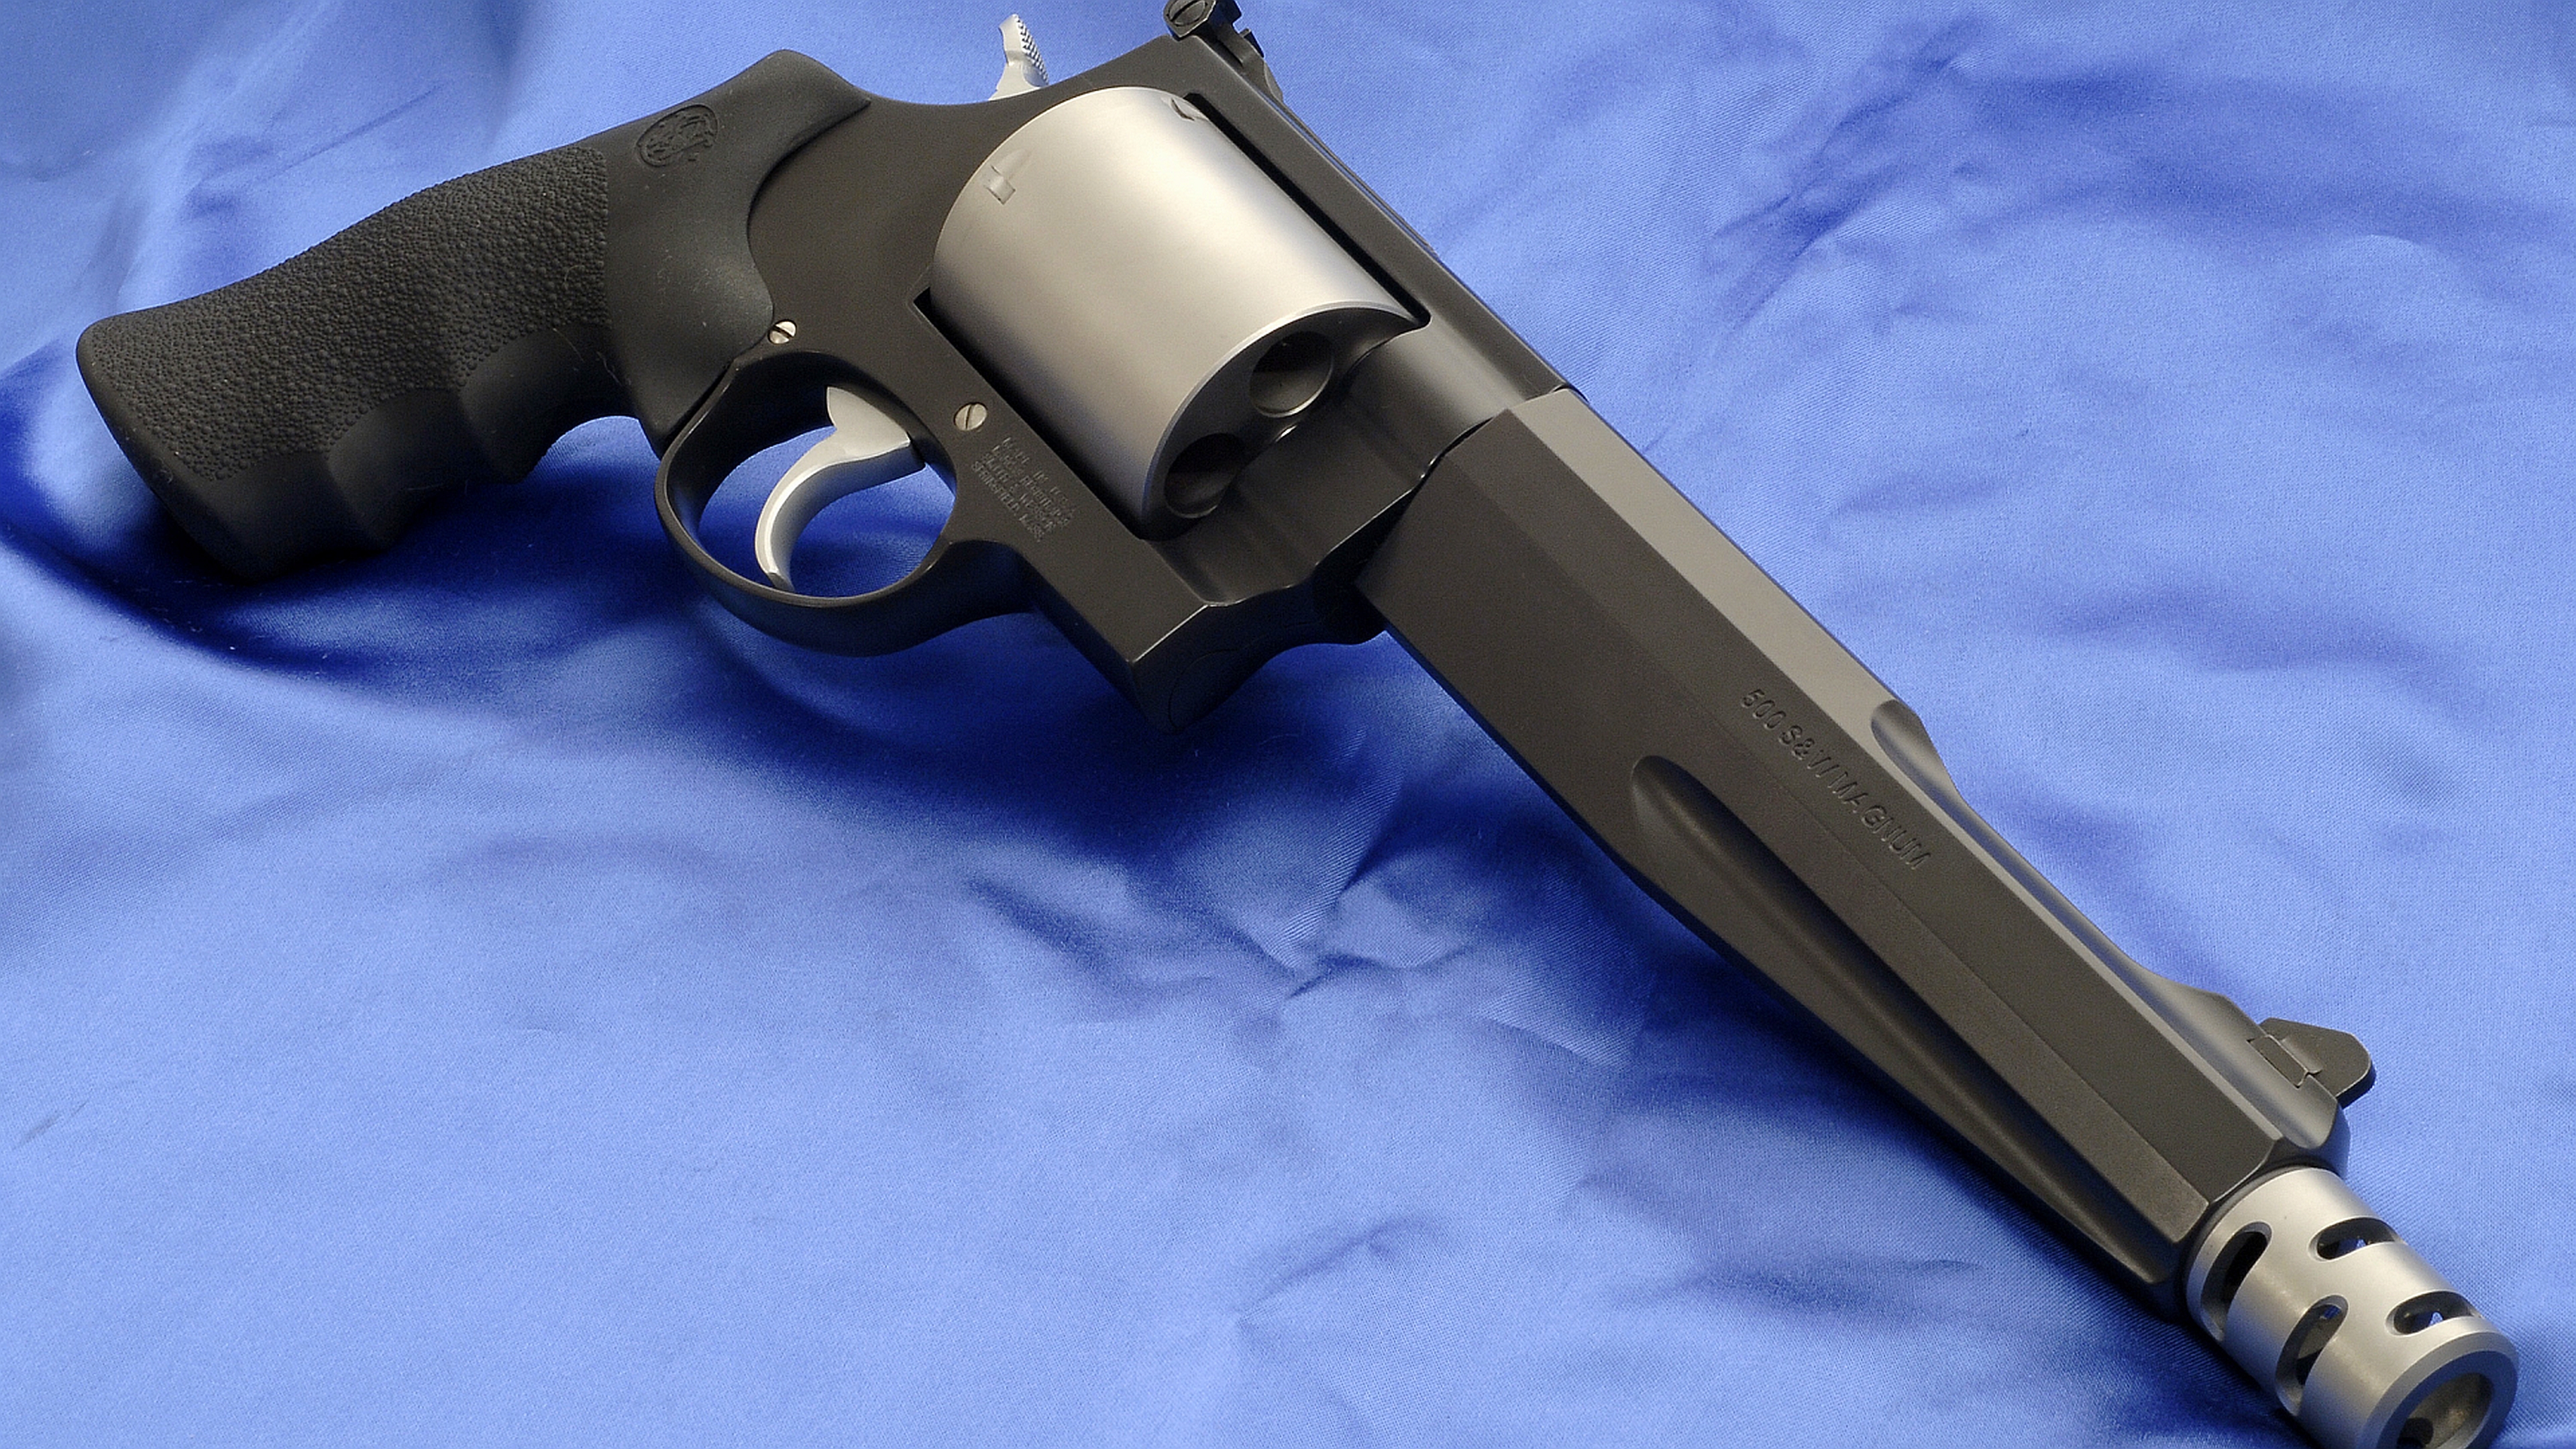 Weapons Smith Amp Wesson 500 Magnum Revolver 3840x2160